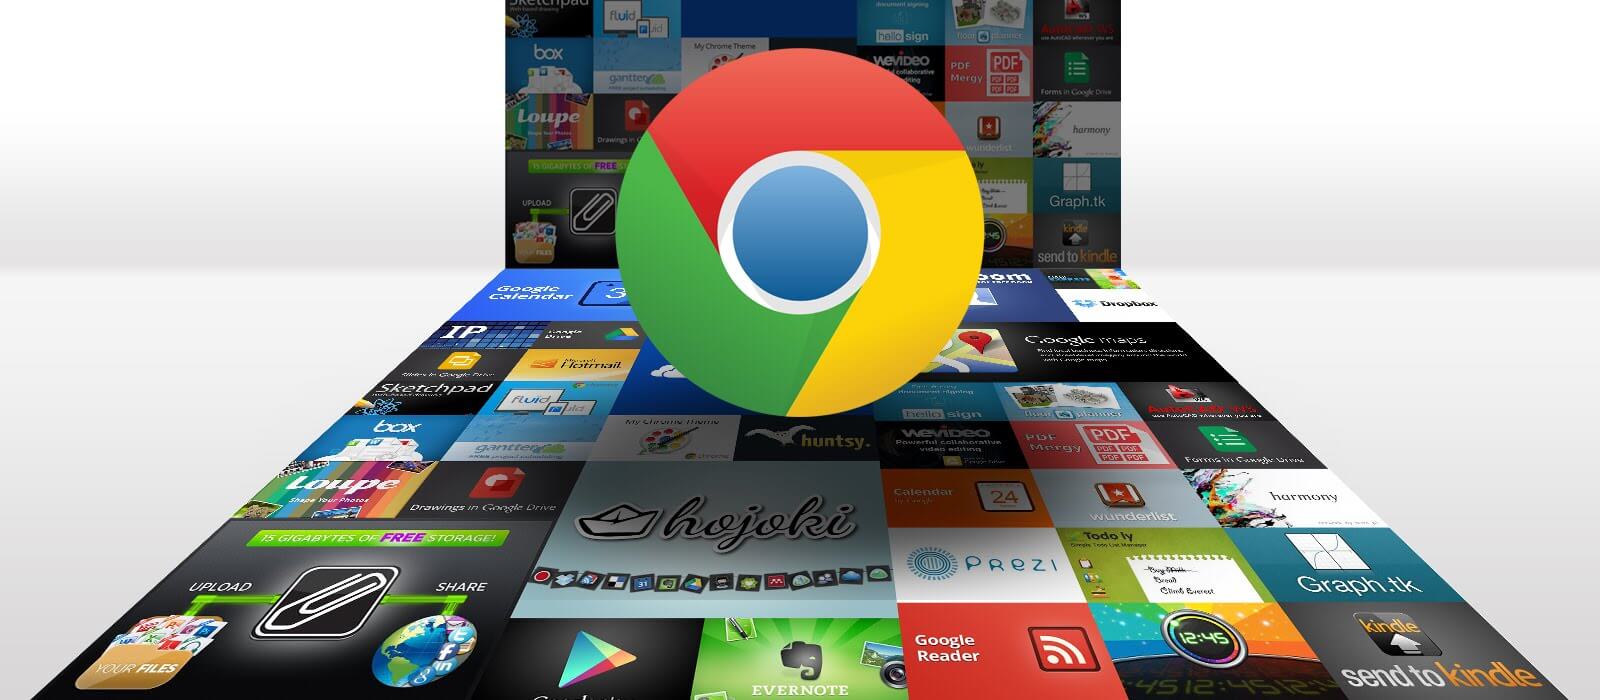 Chrome Extensions on Android